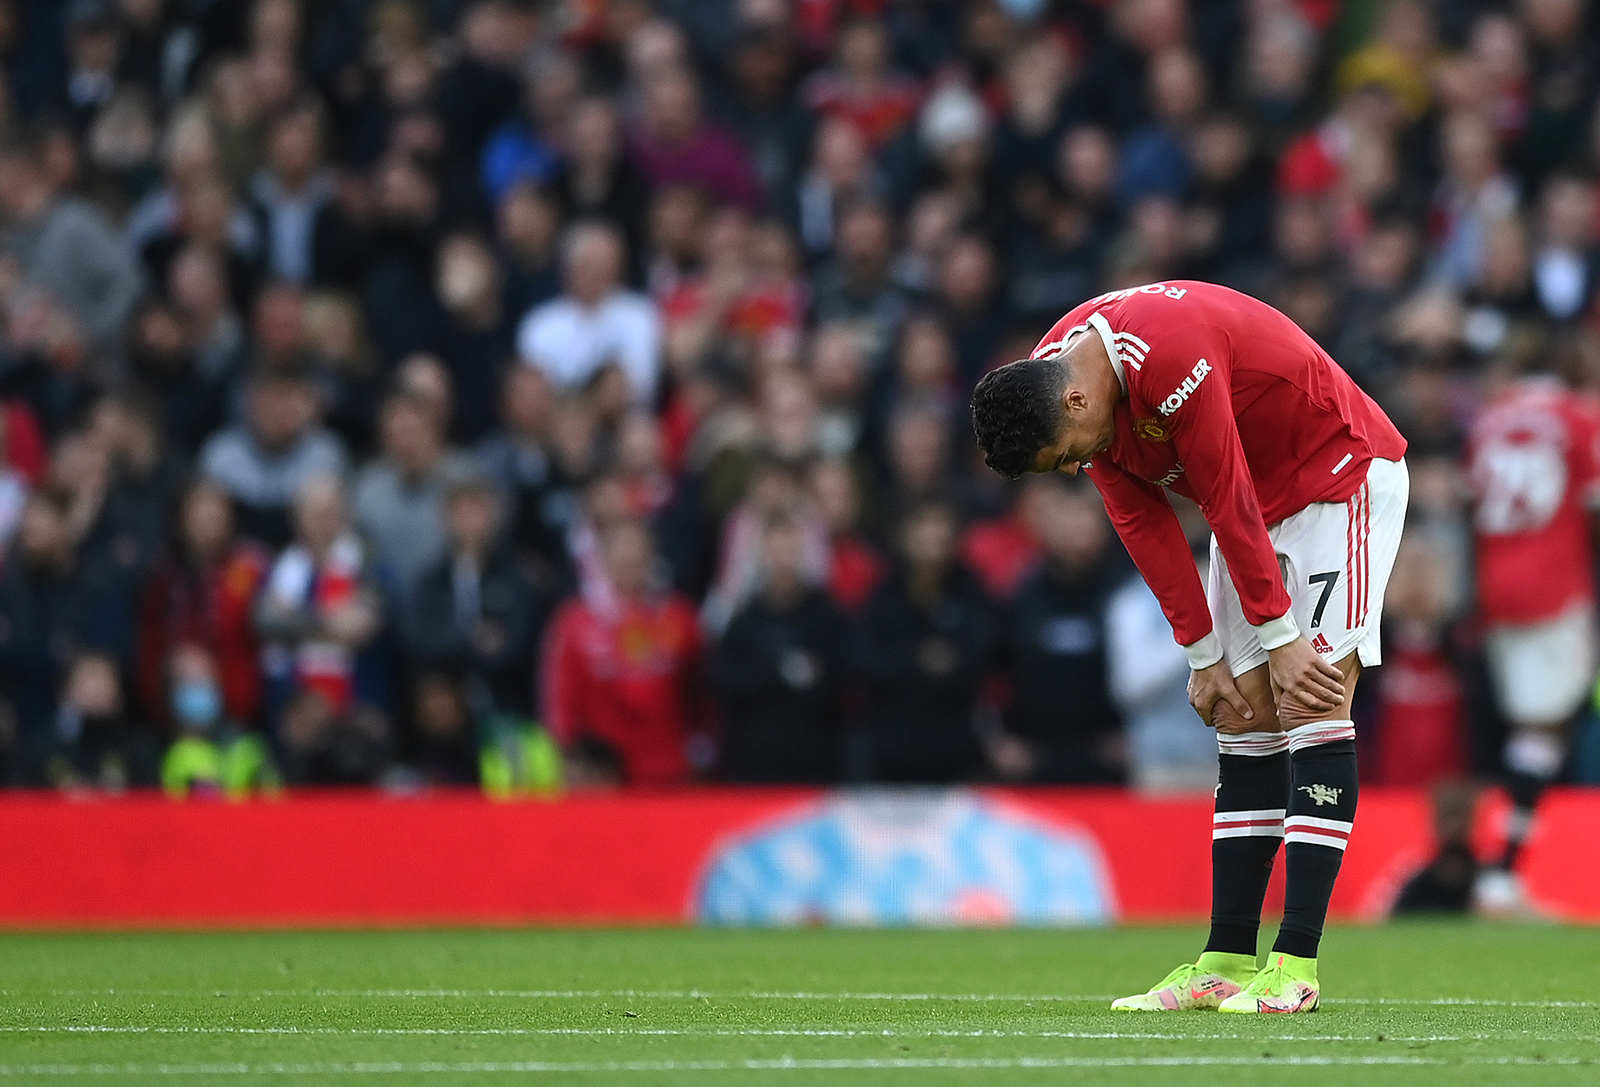 Cristiano Ronaldo of Manchester United looks dejected after their side concedes a second goal scored by Diogo Jota of Liverpool during the Premier League match.